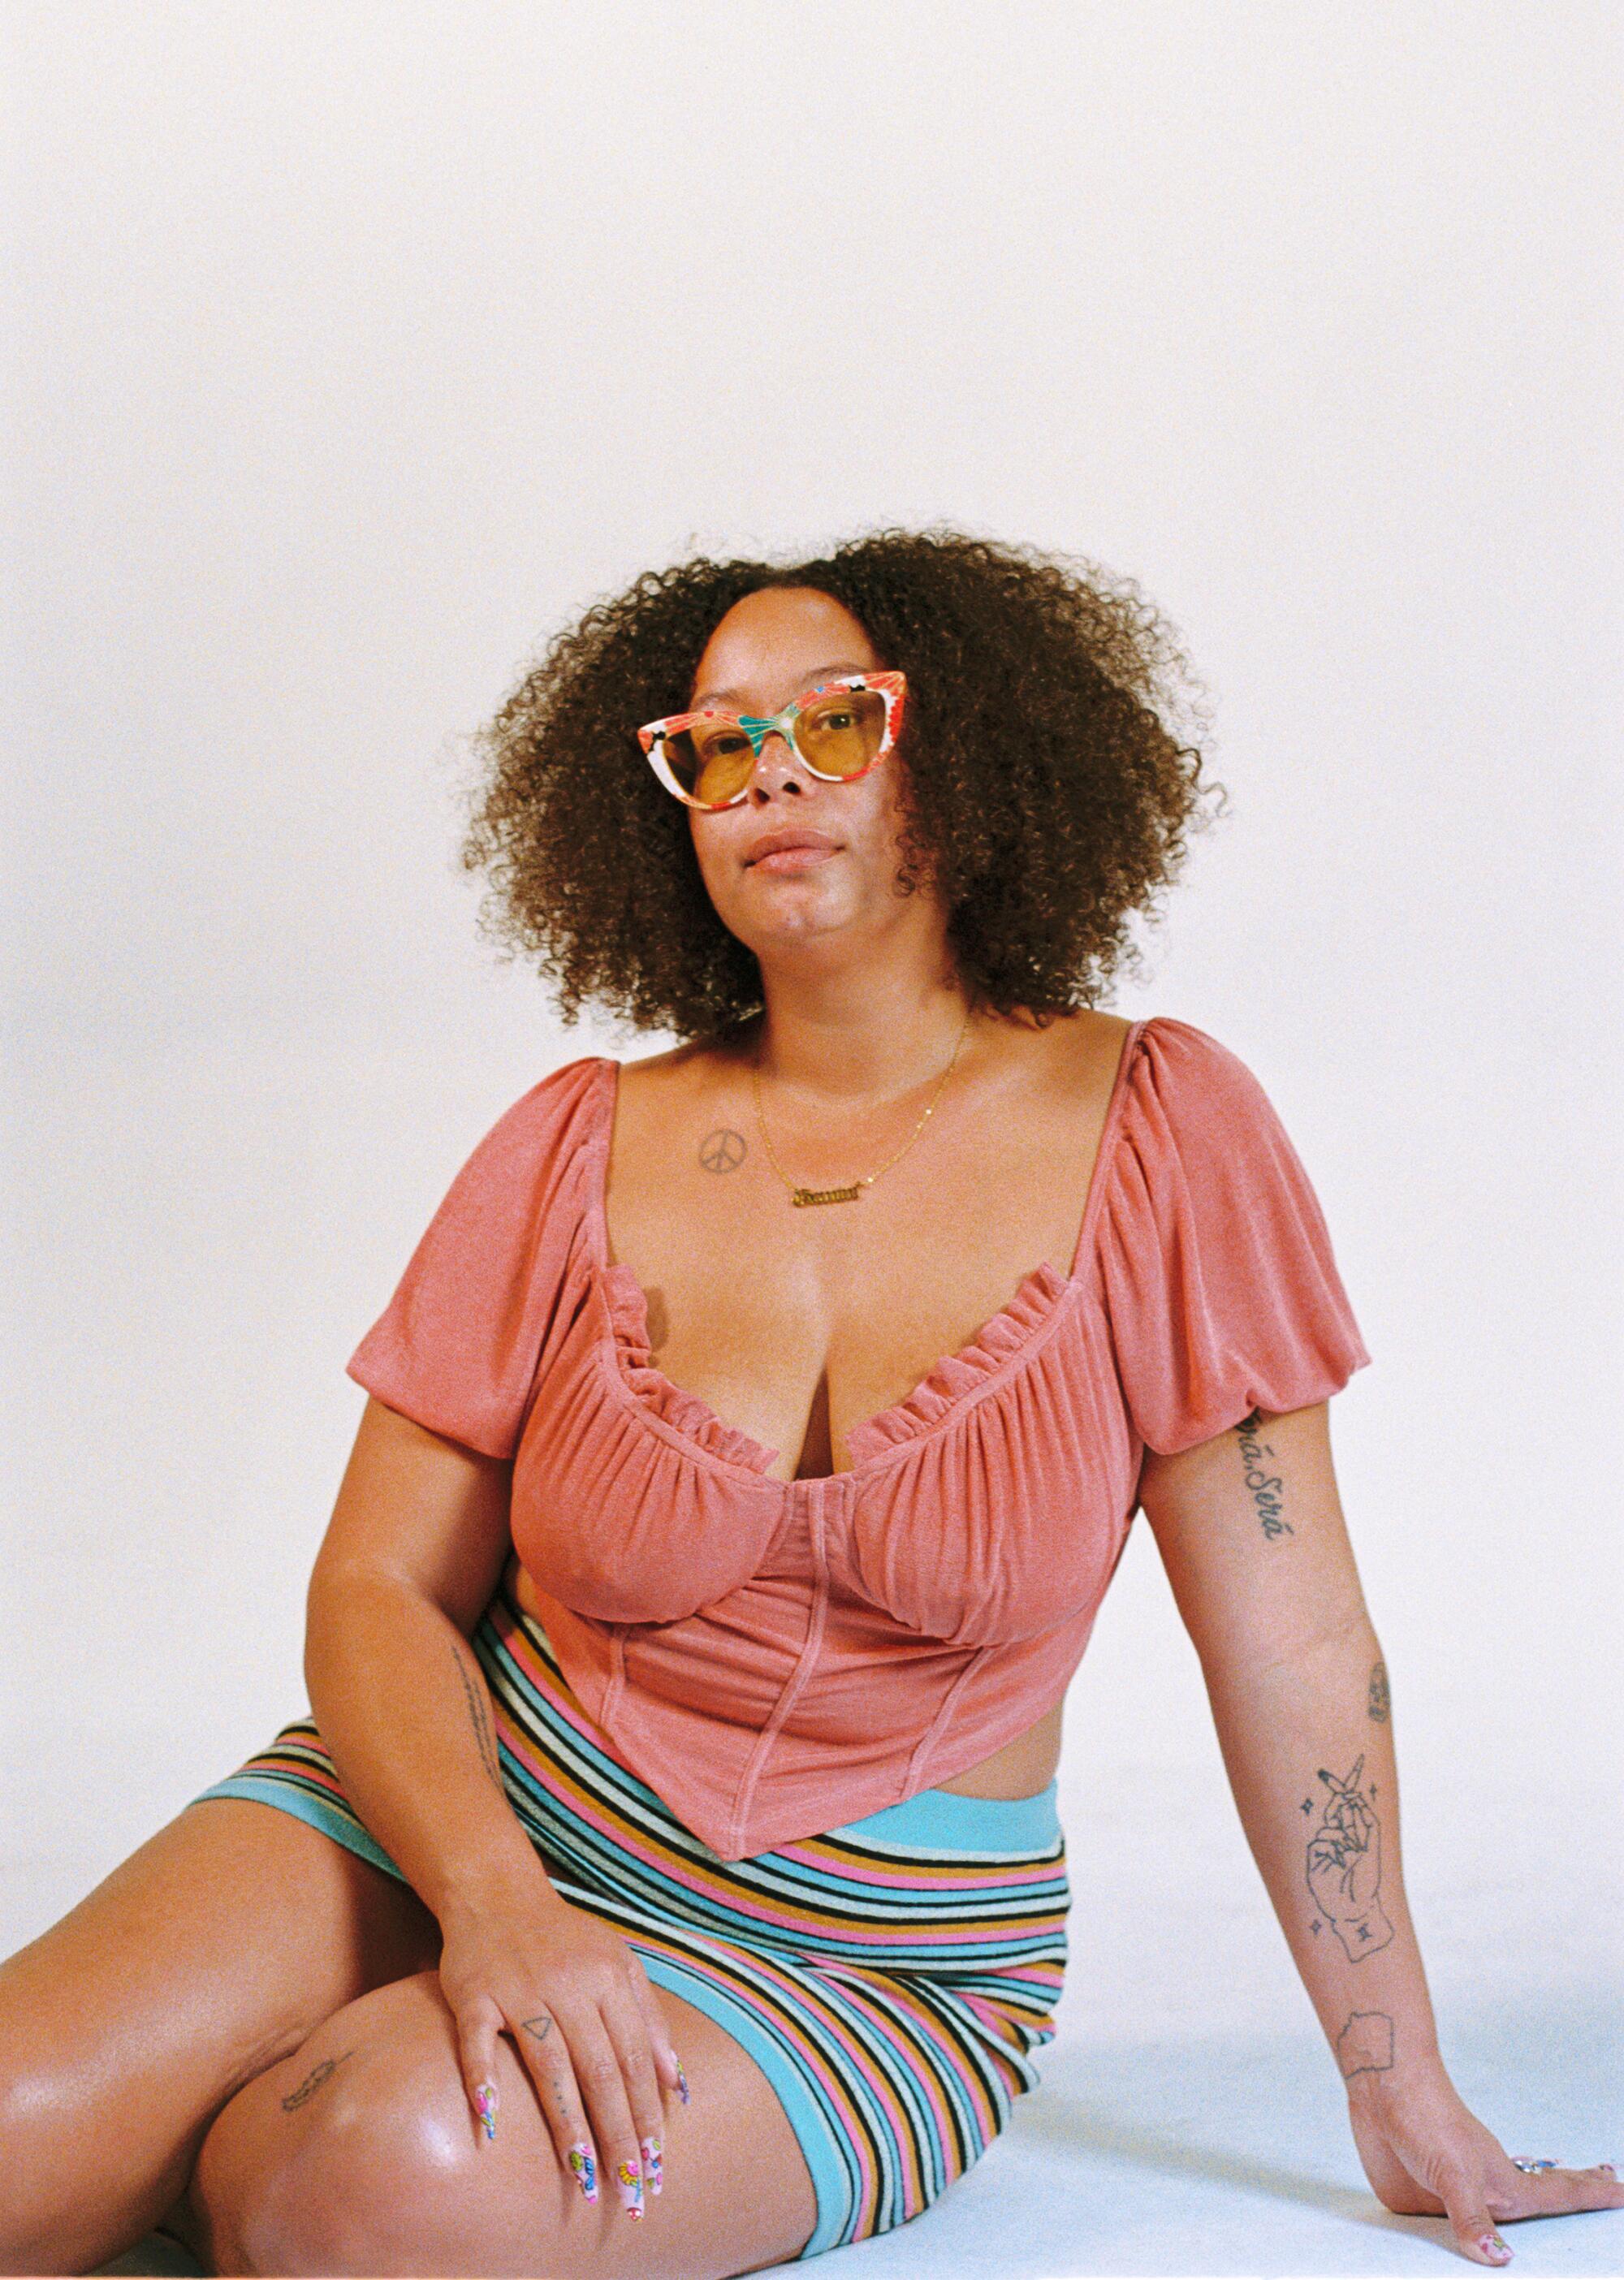 Sasha Jones (she/her) owner of Cuties LA which hosts queer events around the city.